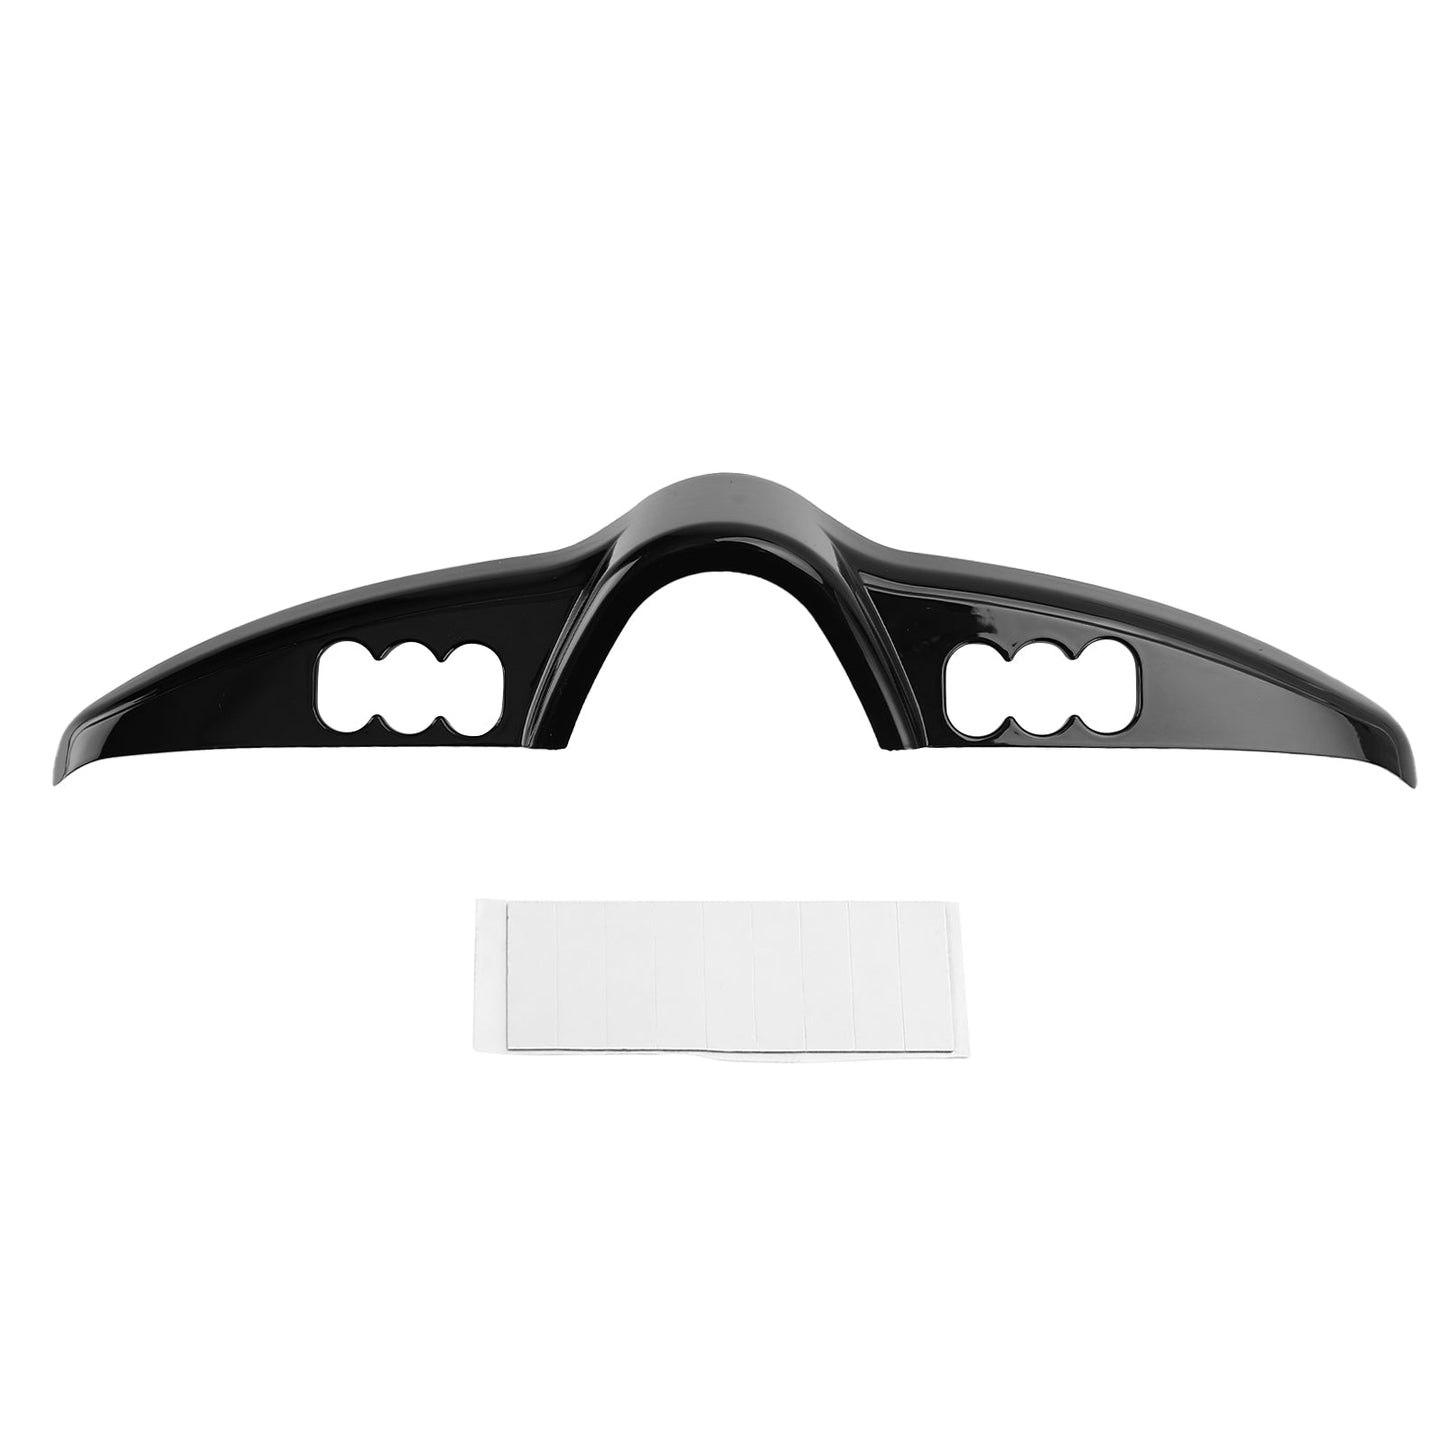 Switch Panel Accent Cover Trim for Touring Electra Glides Tri Glide 2014-2020 Black